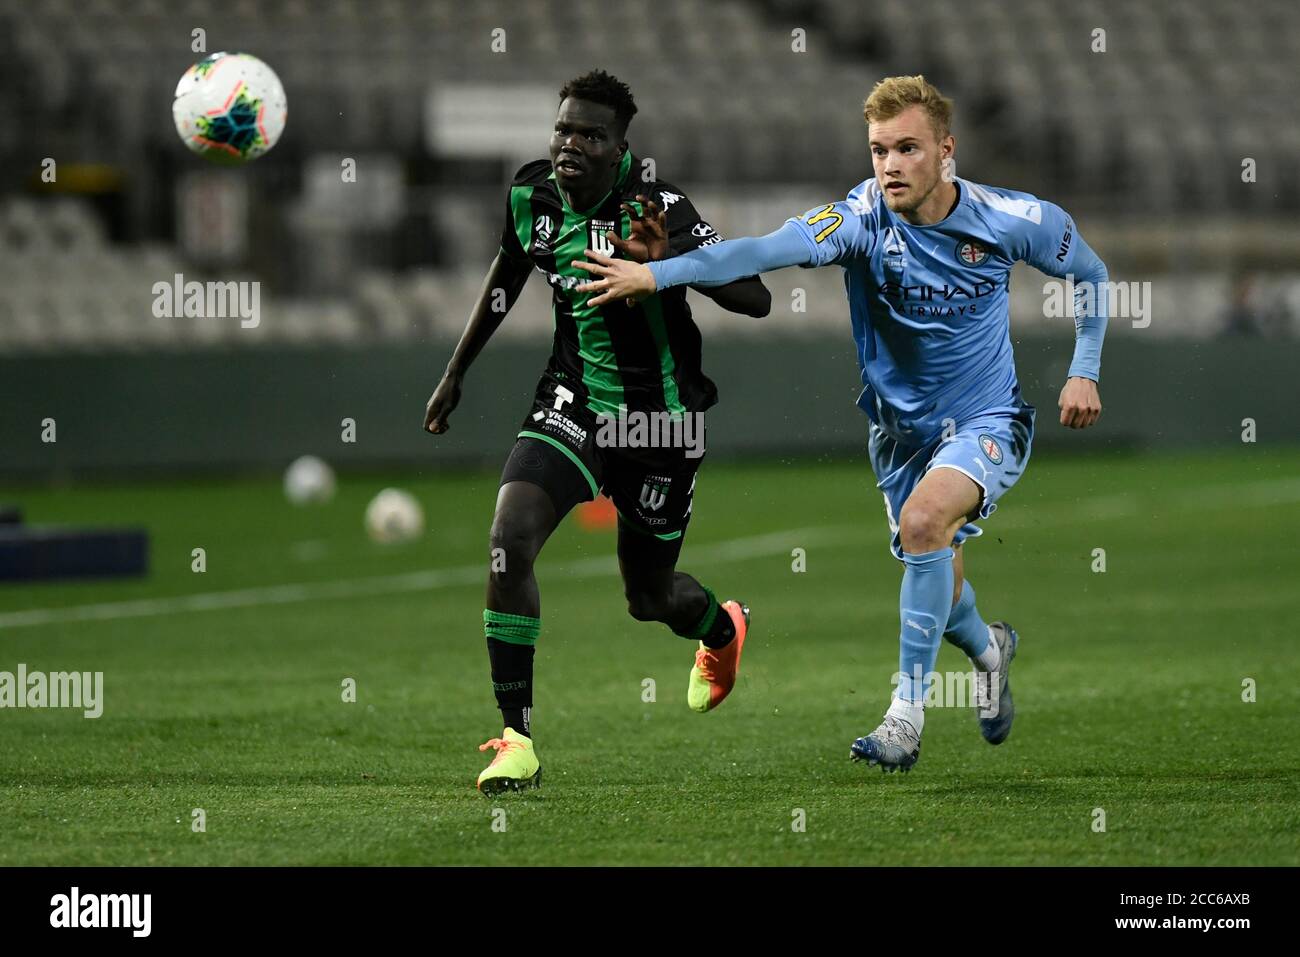 19th August 2020; Jubilee Oval, Sydney, New South Wales, Australia; A League Football, Western United FC versus Melbourne City FC; Nathaniel Atkinson of Melbourne City holds off the challenge from Kuach Yuel of Western United Stock Photo